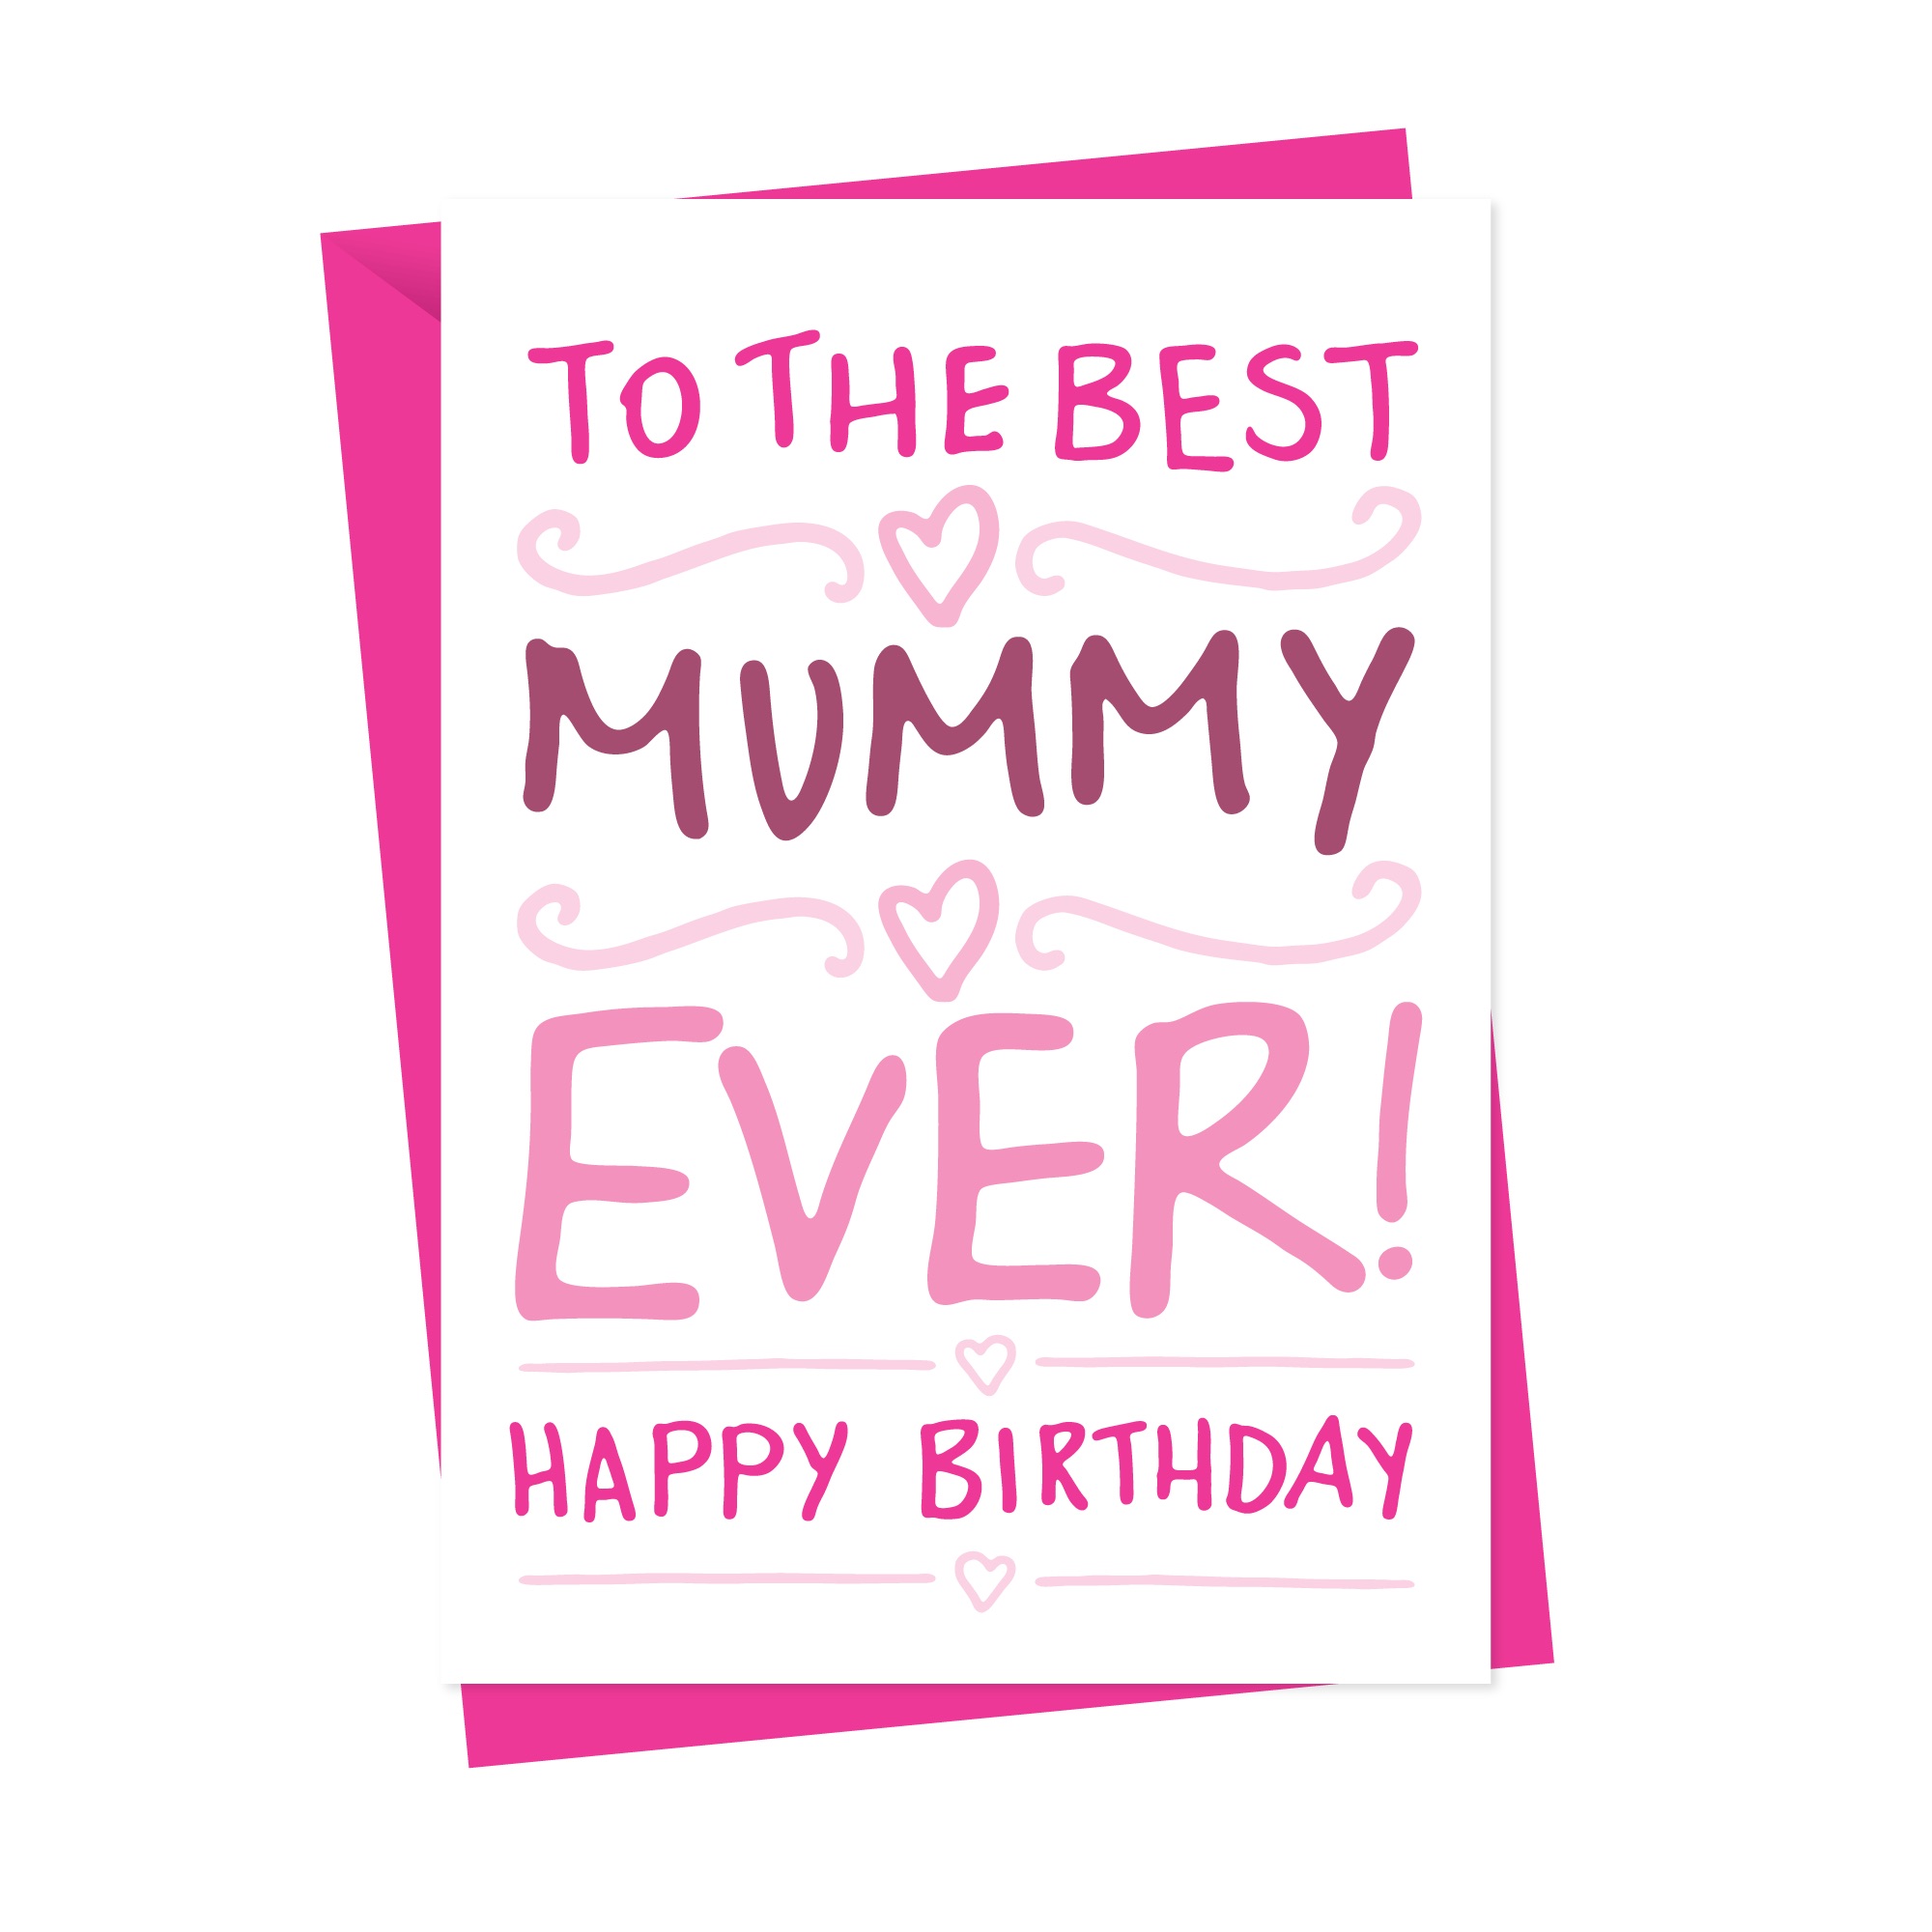 Birthday Card For Best Mum or Mummy Ever